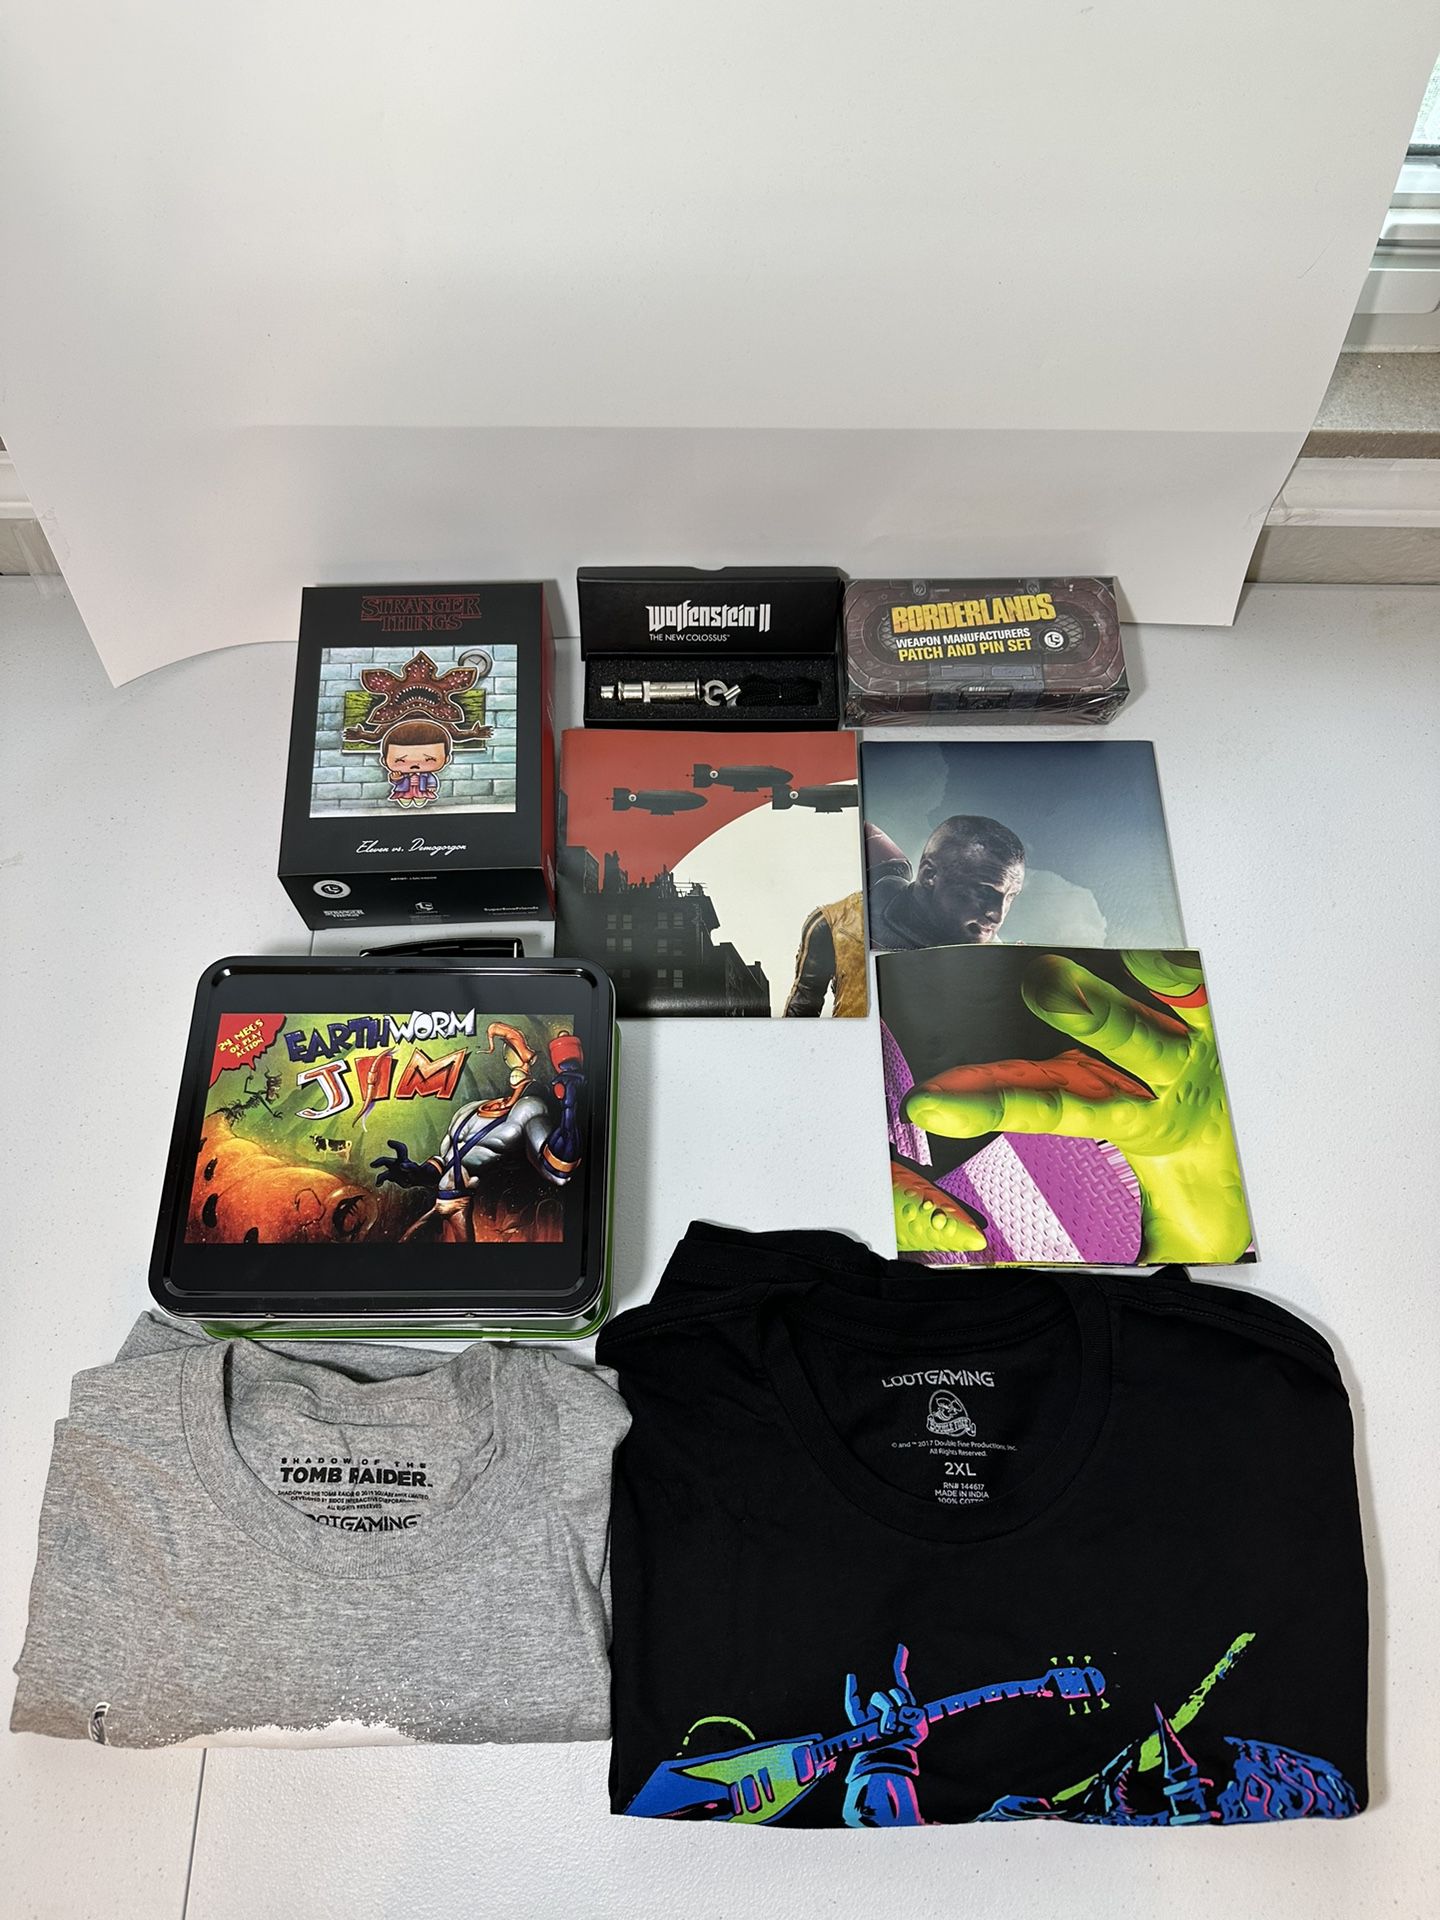 Lootcrate open box, tshirts, lunch box Jimmy, stranger things toy, posters